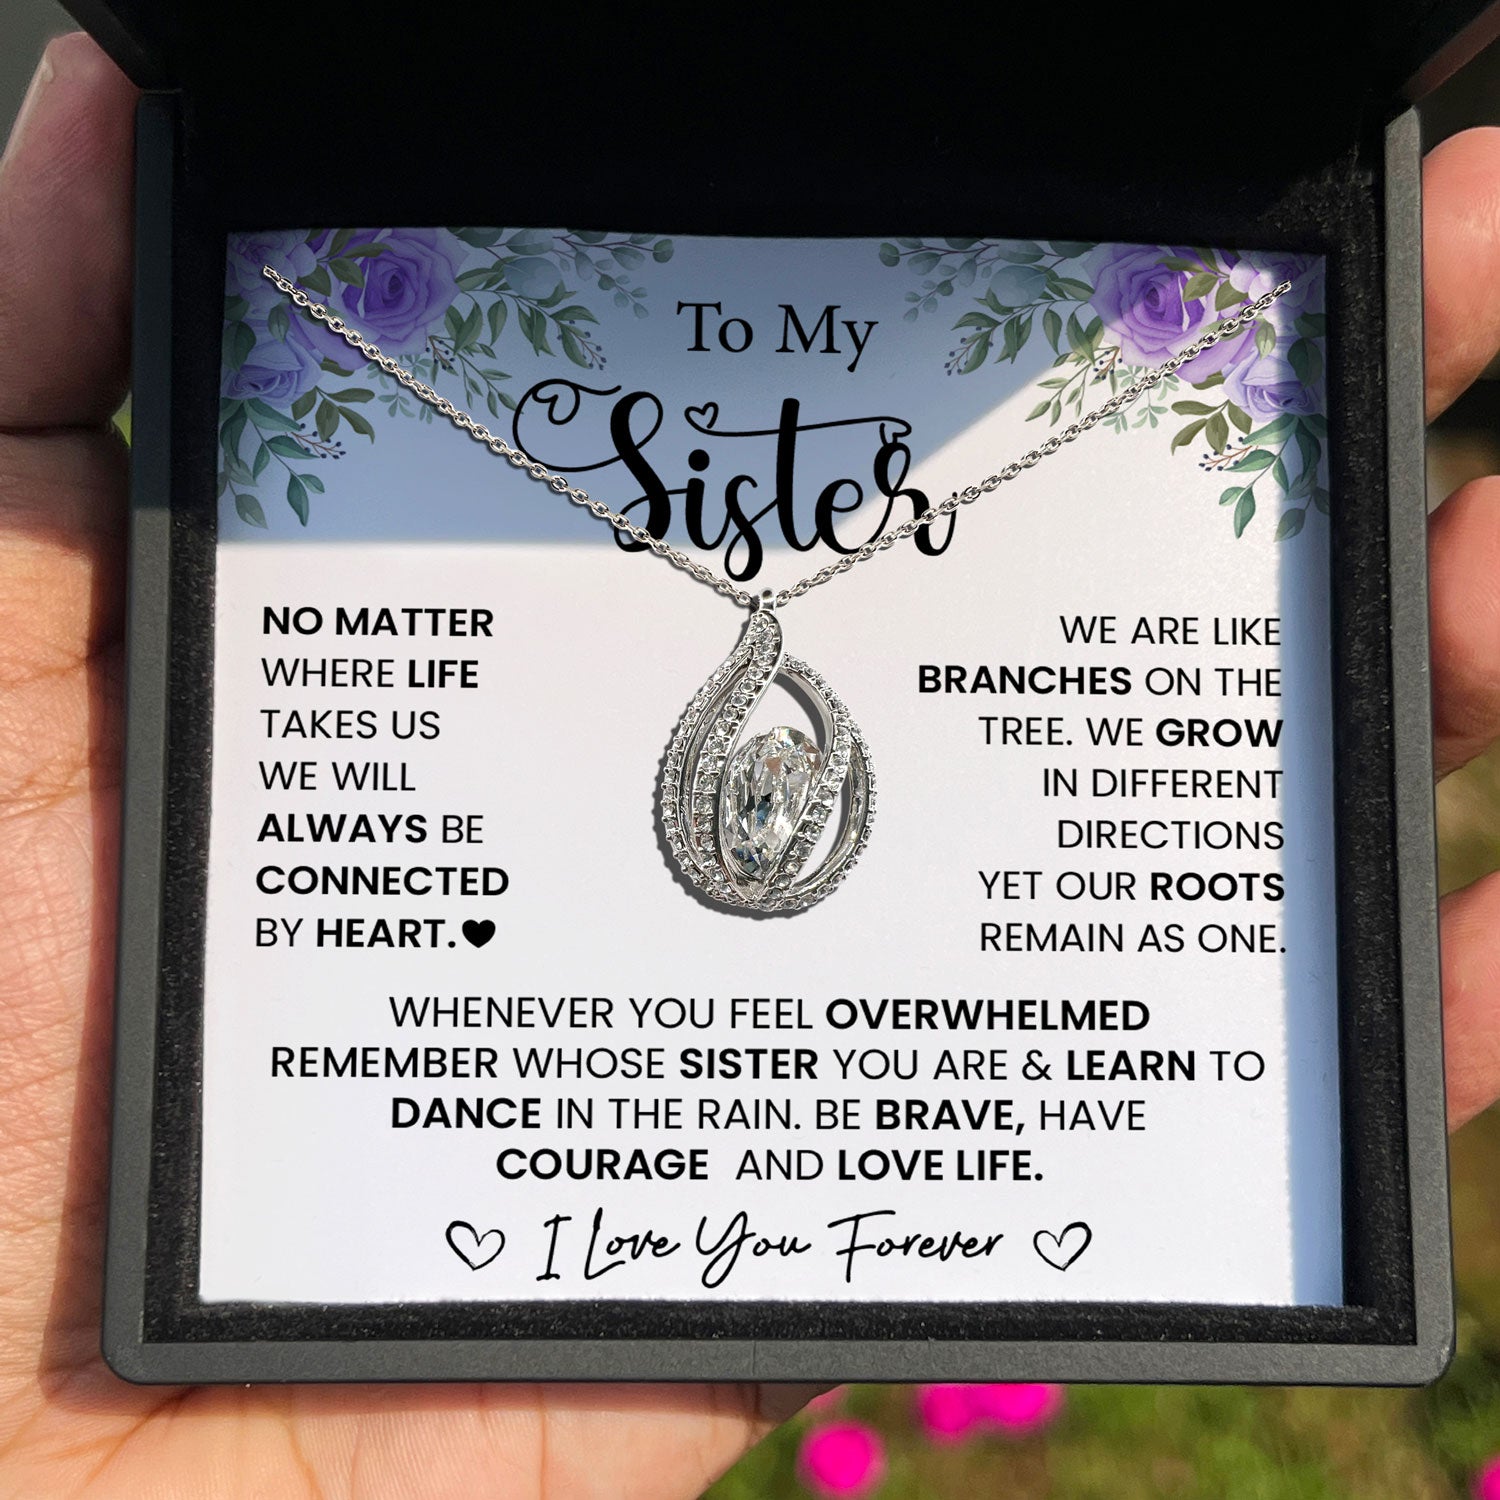 To My Sister - Our Roots Remain As One - Orbital Birdcage Necklace